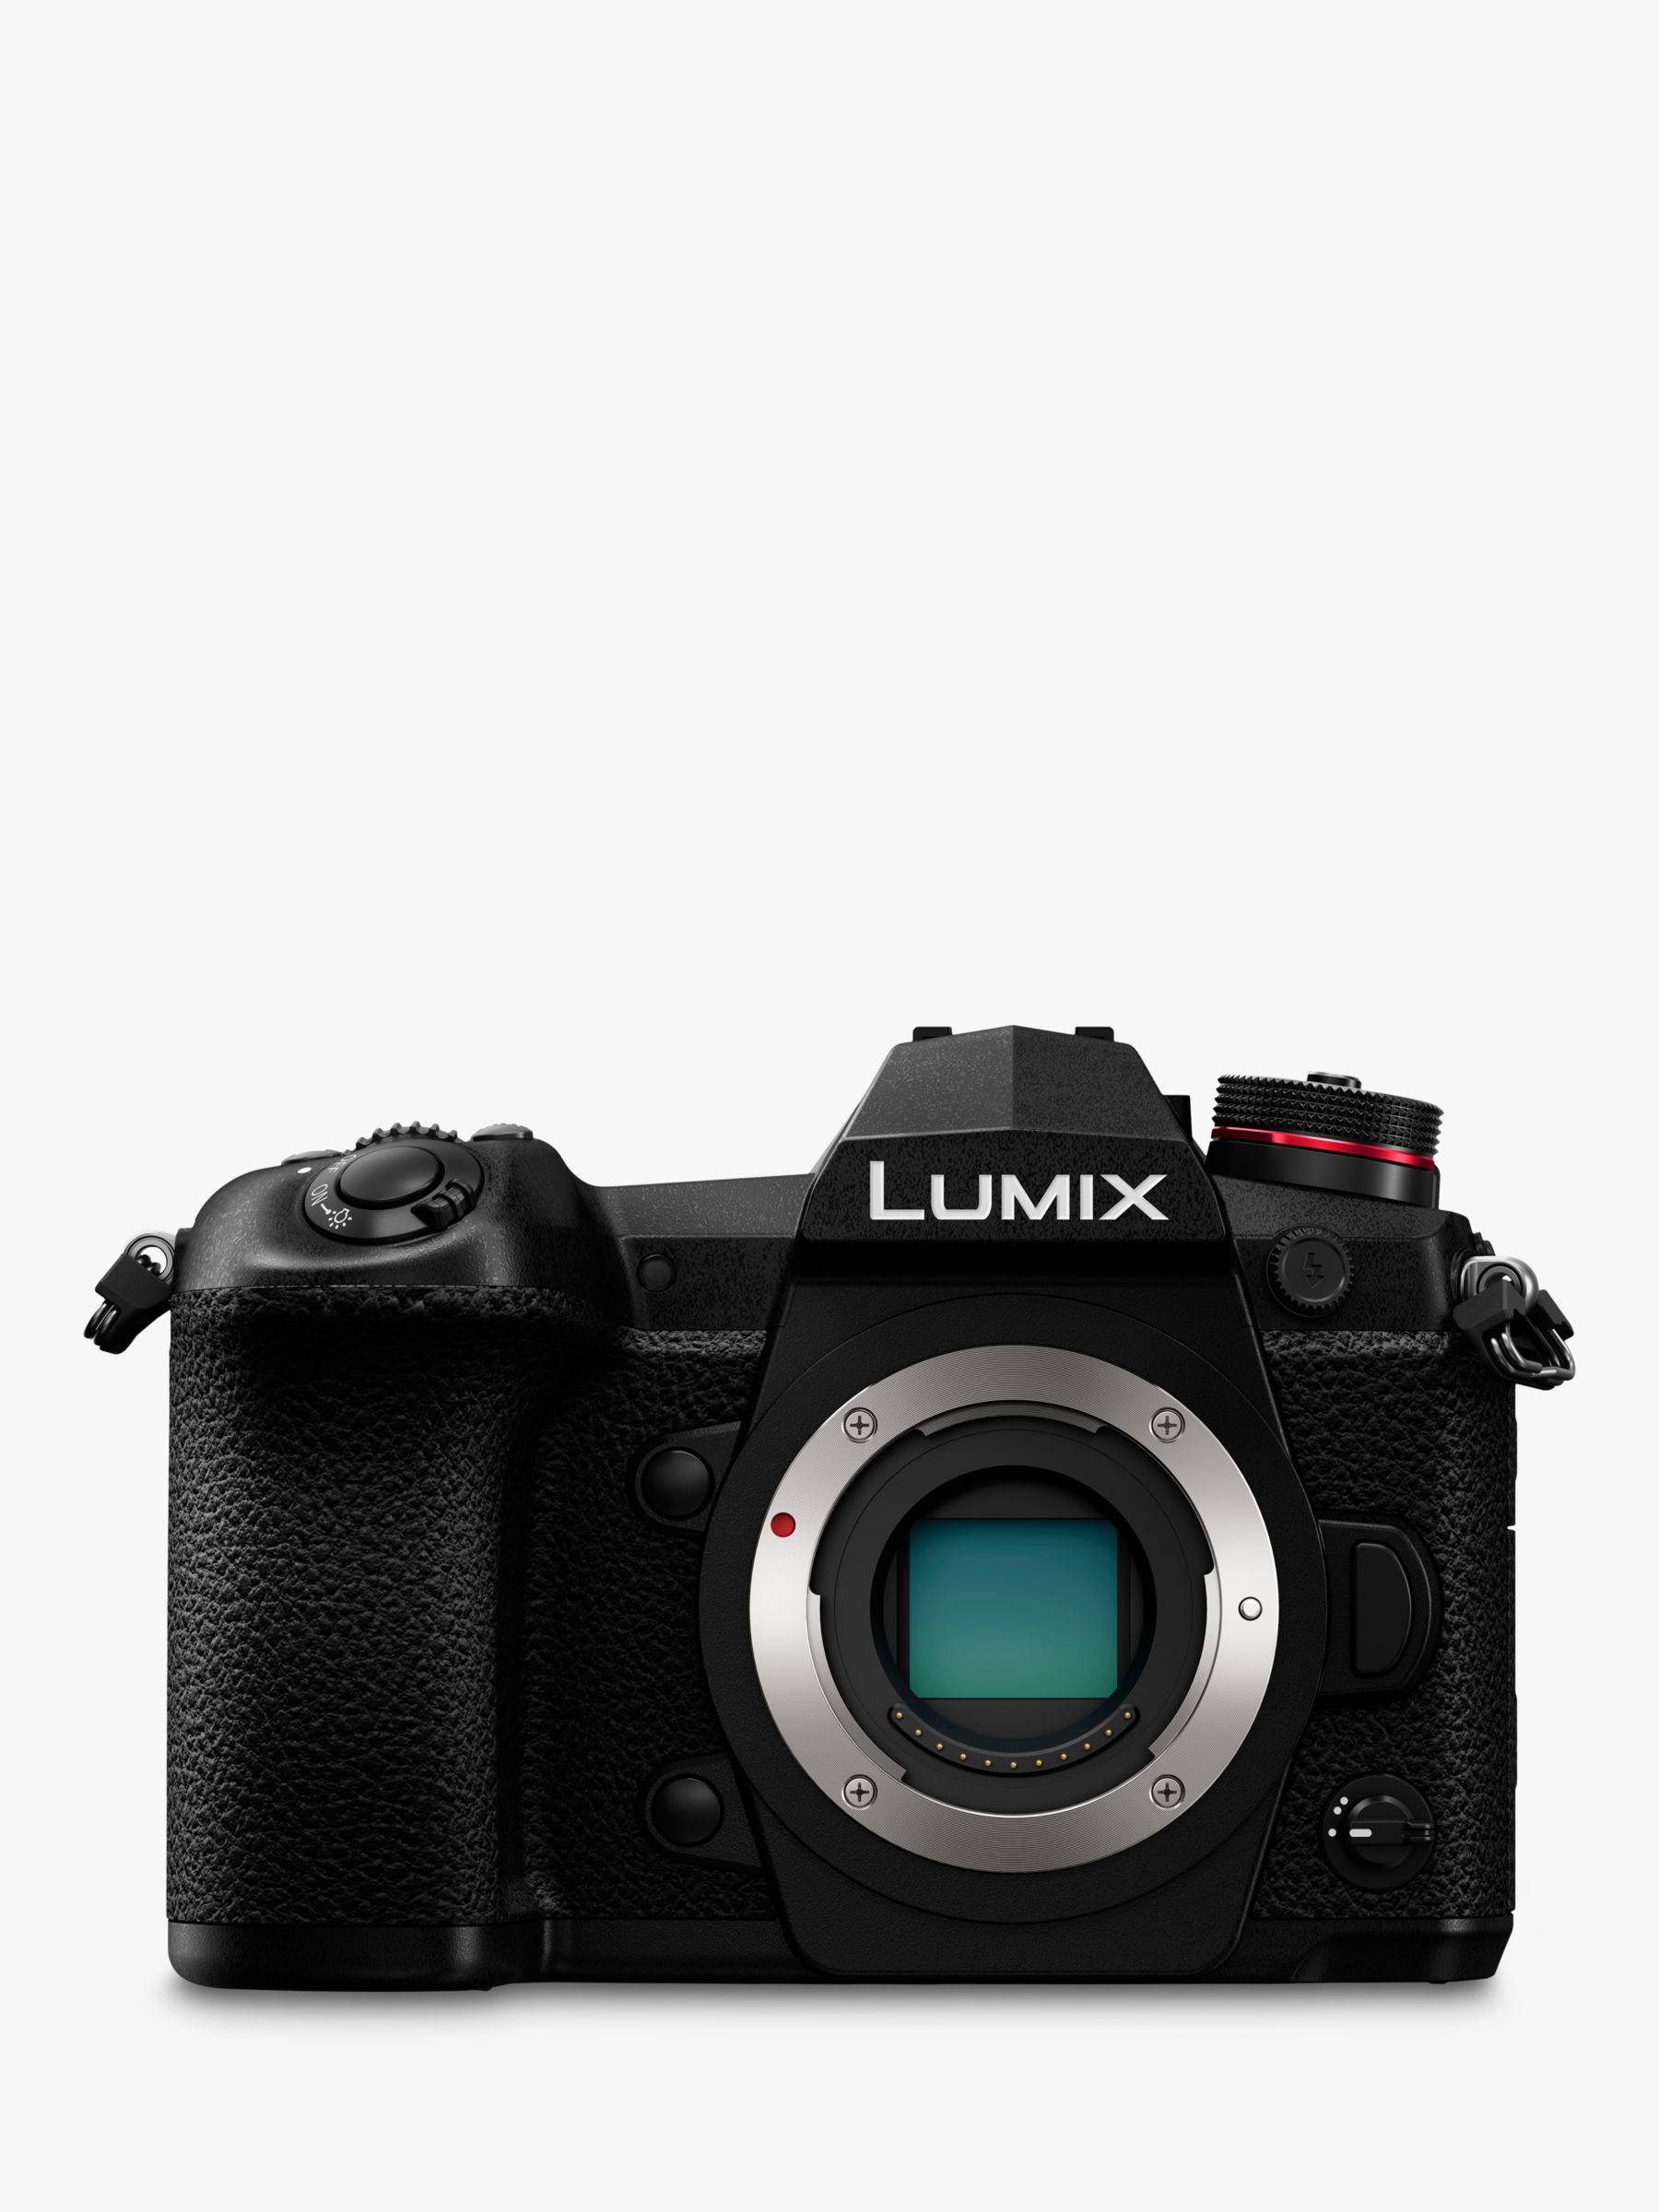 Panasonic Lumix DC-G9 Compact System Camera, 4K, 20.3MP, 4x Digital Zoom, Wi-Fi, OLED Viewfinder, 3 Vari-Angle Touch Screen, Body Only, Black